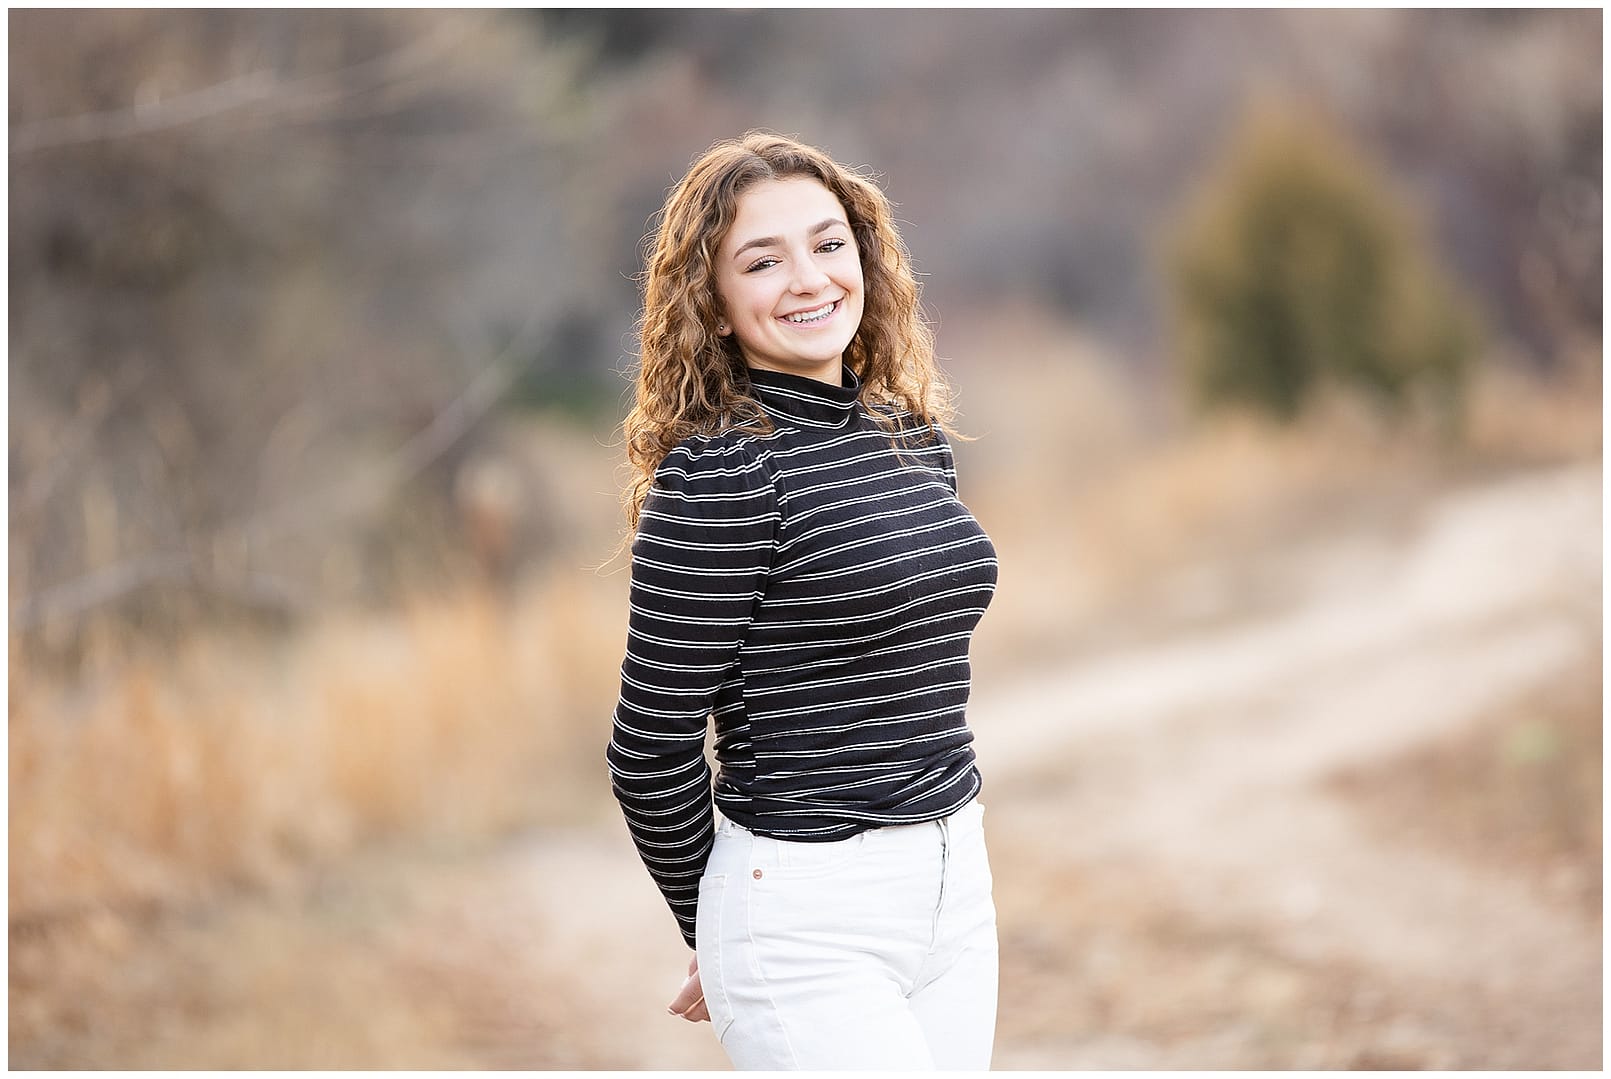 Tween poses in Boise,ID open space. Photos by Tiffany Hix Photography.